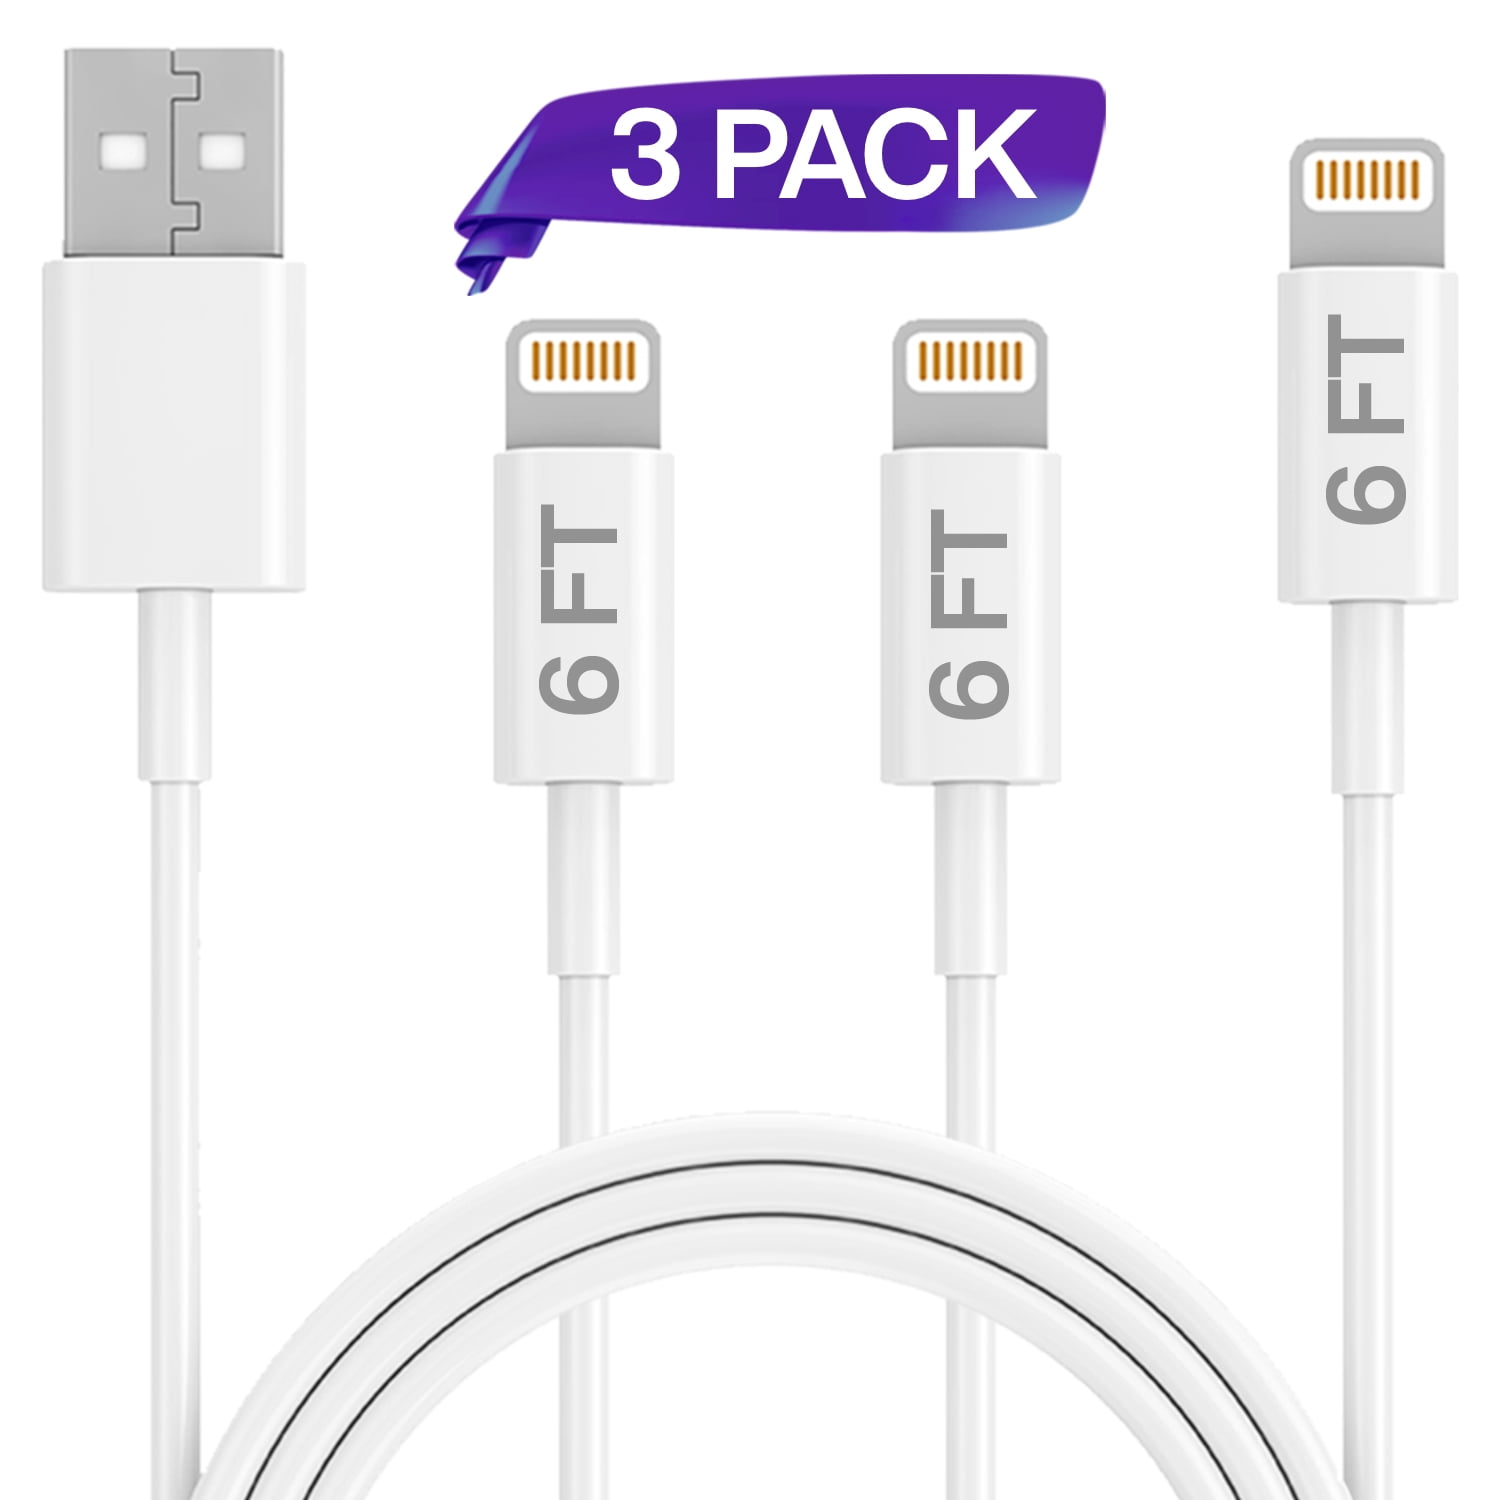 iPhone Lightning Cable 5 Pack 10FT USB Cable Infinite Power Compatible with Apple iPhone Xs,Xs Max,XR,X,8,8 Plus,7,7 Plus,6S,6S Plus,iPad Air,Mini,iPod Touch,Case Certified Charging & Syncing Cord